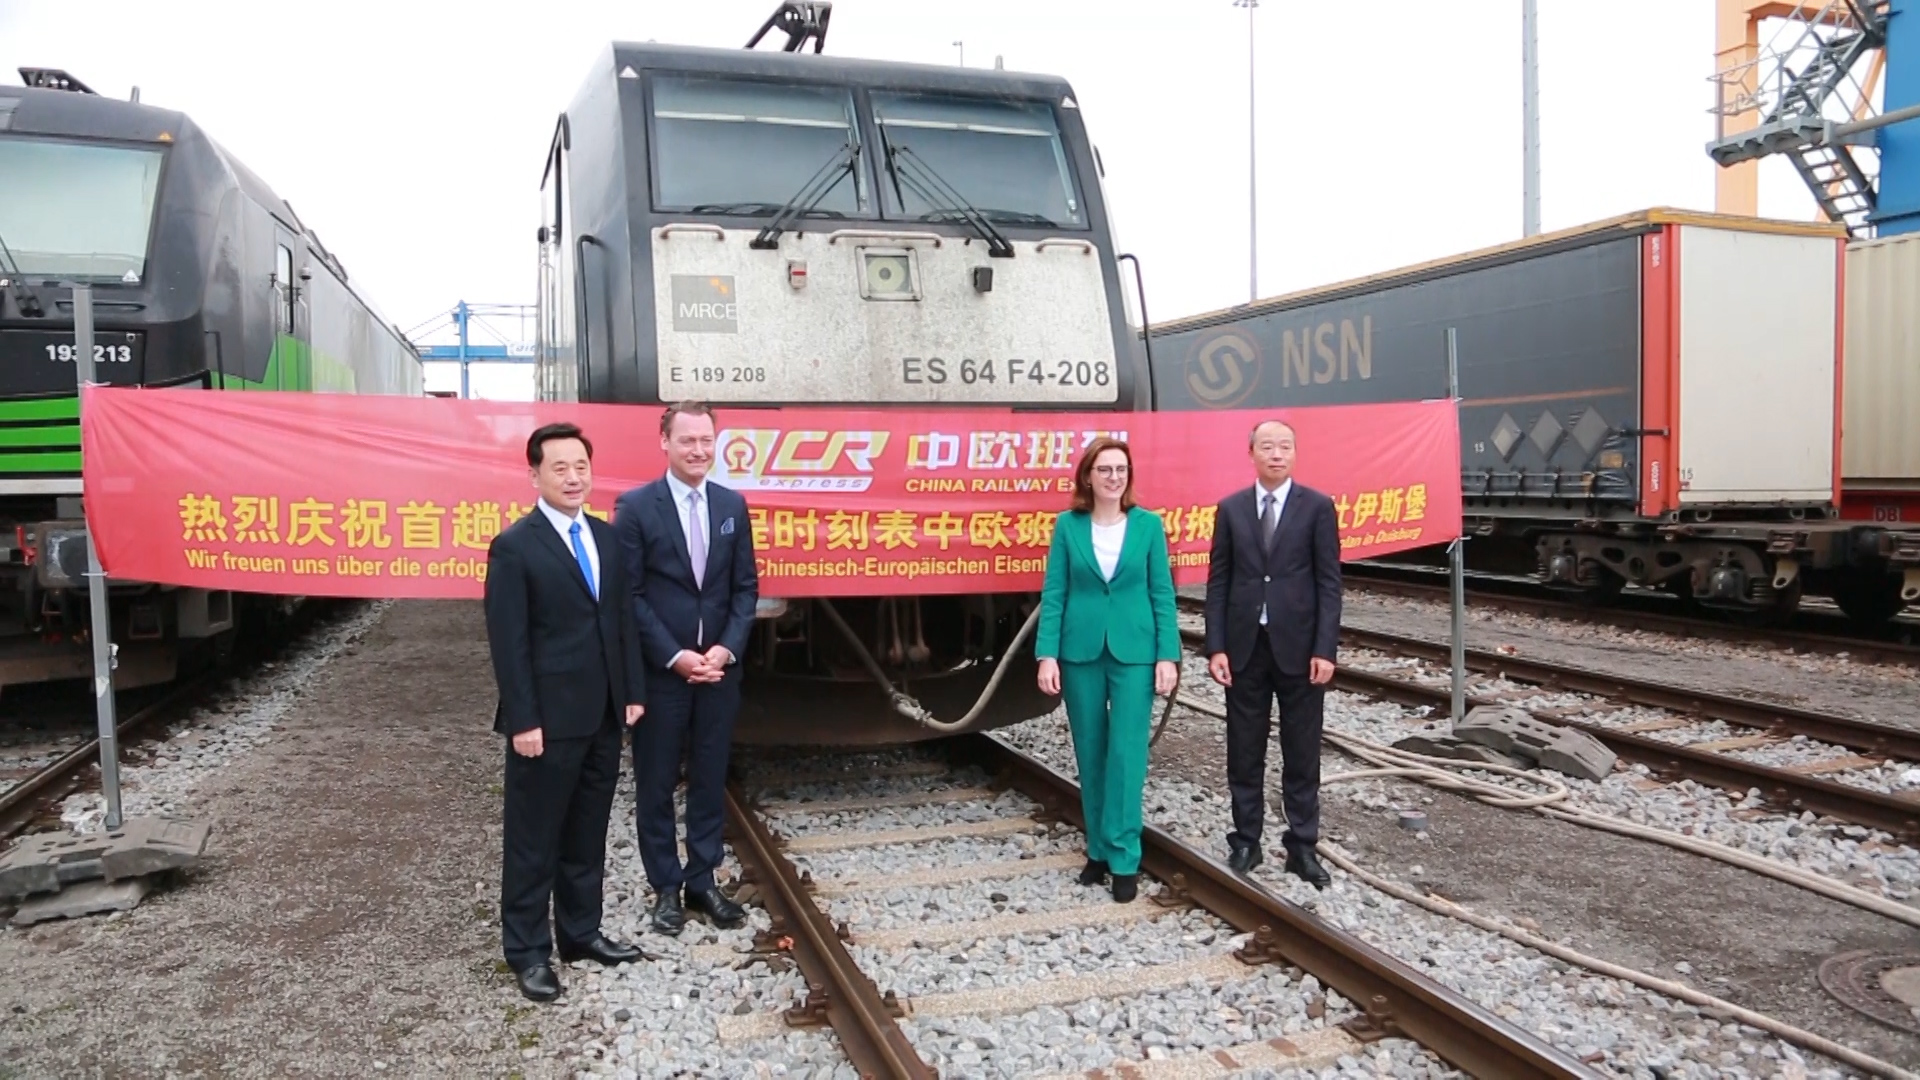 Trains from China to Germany have improved traveling time by up to four days thanks to cooperation between Berlin and Beijing./Peter Oliver/CGTN/